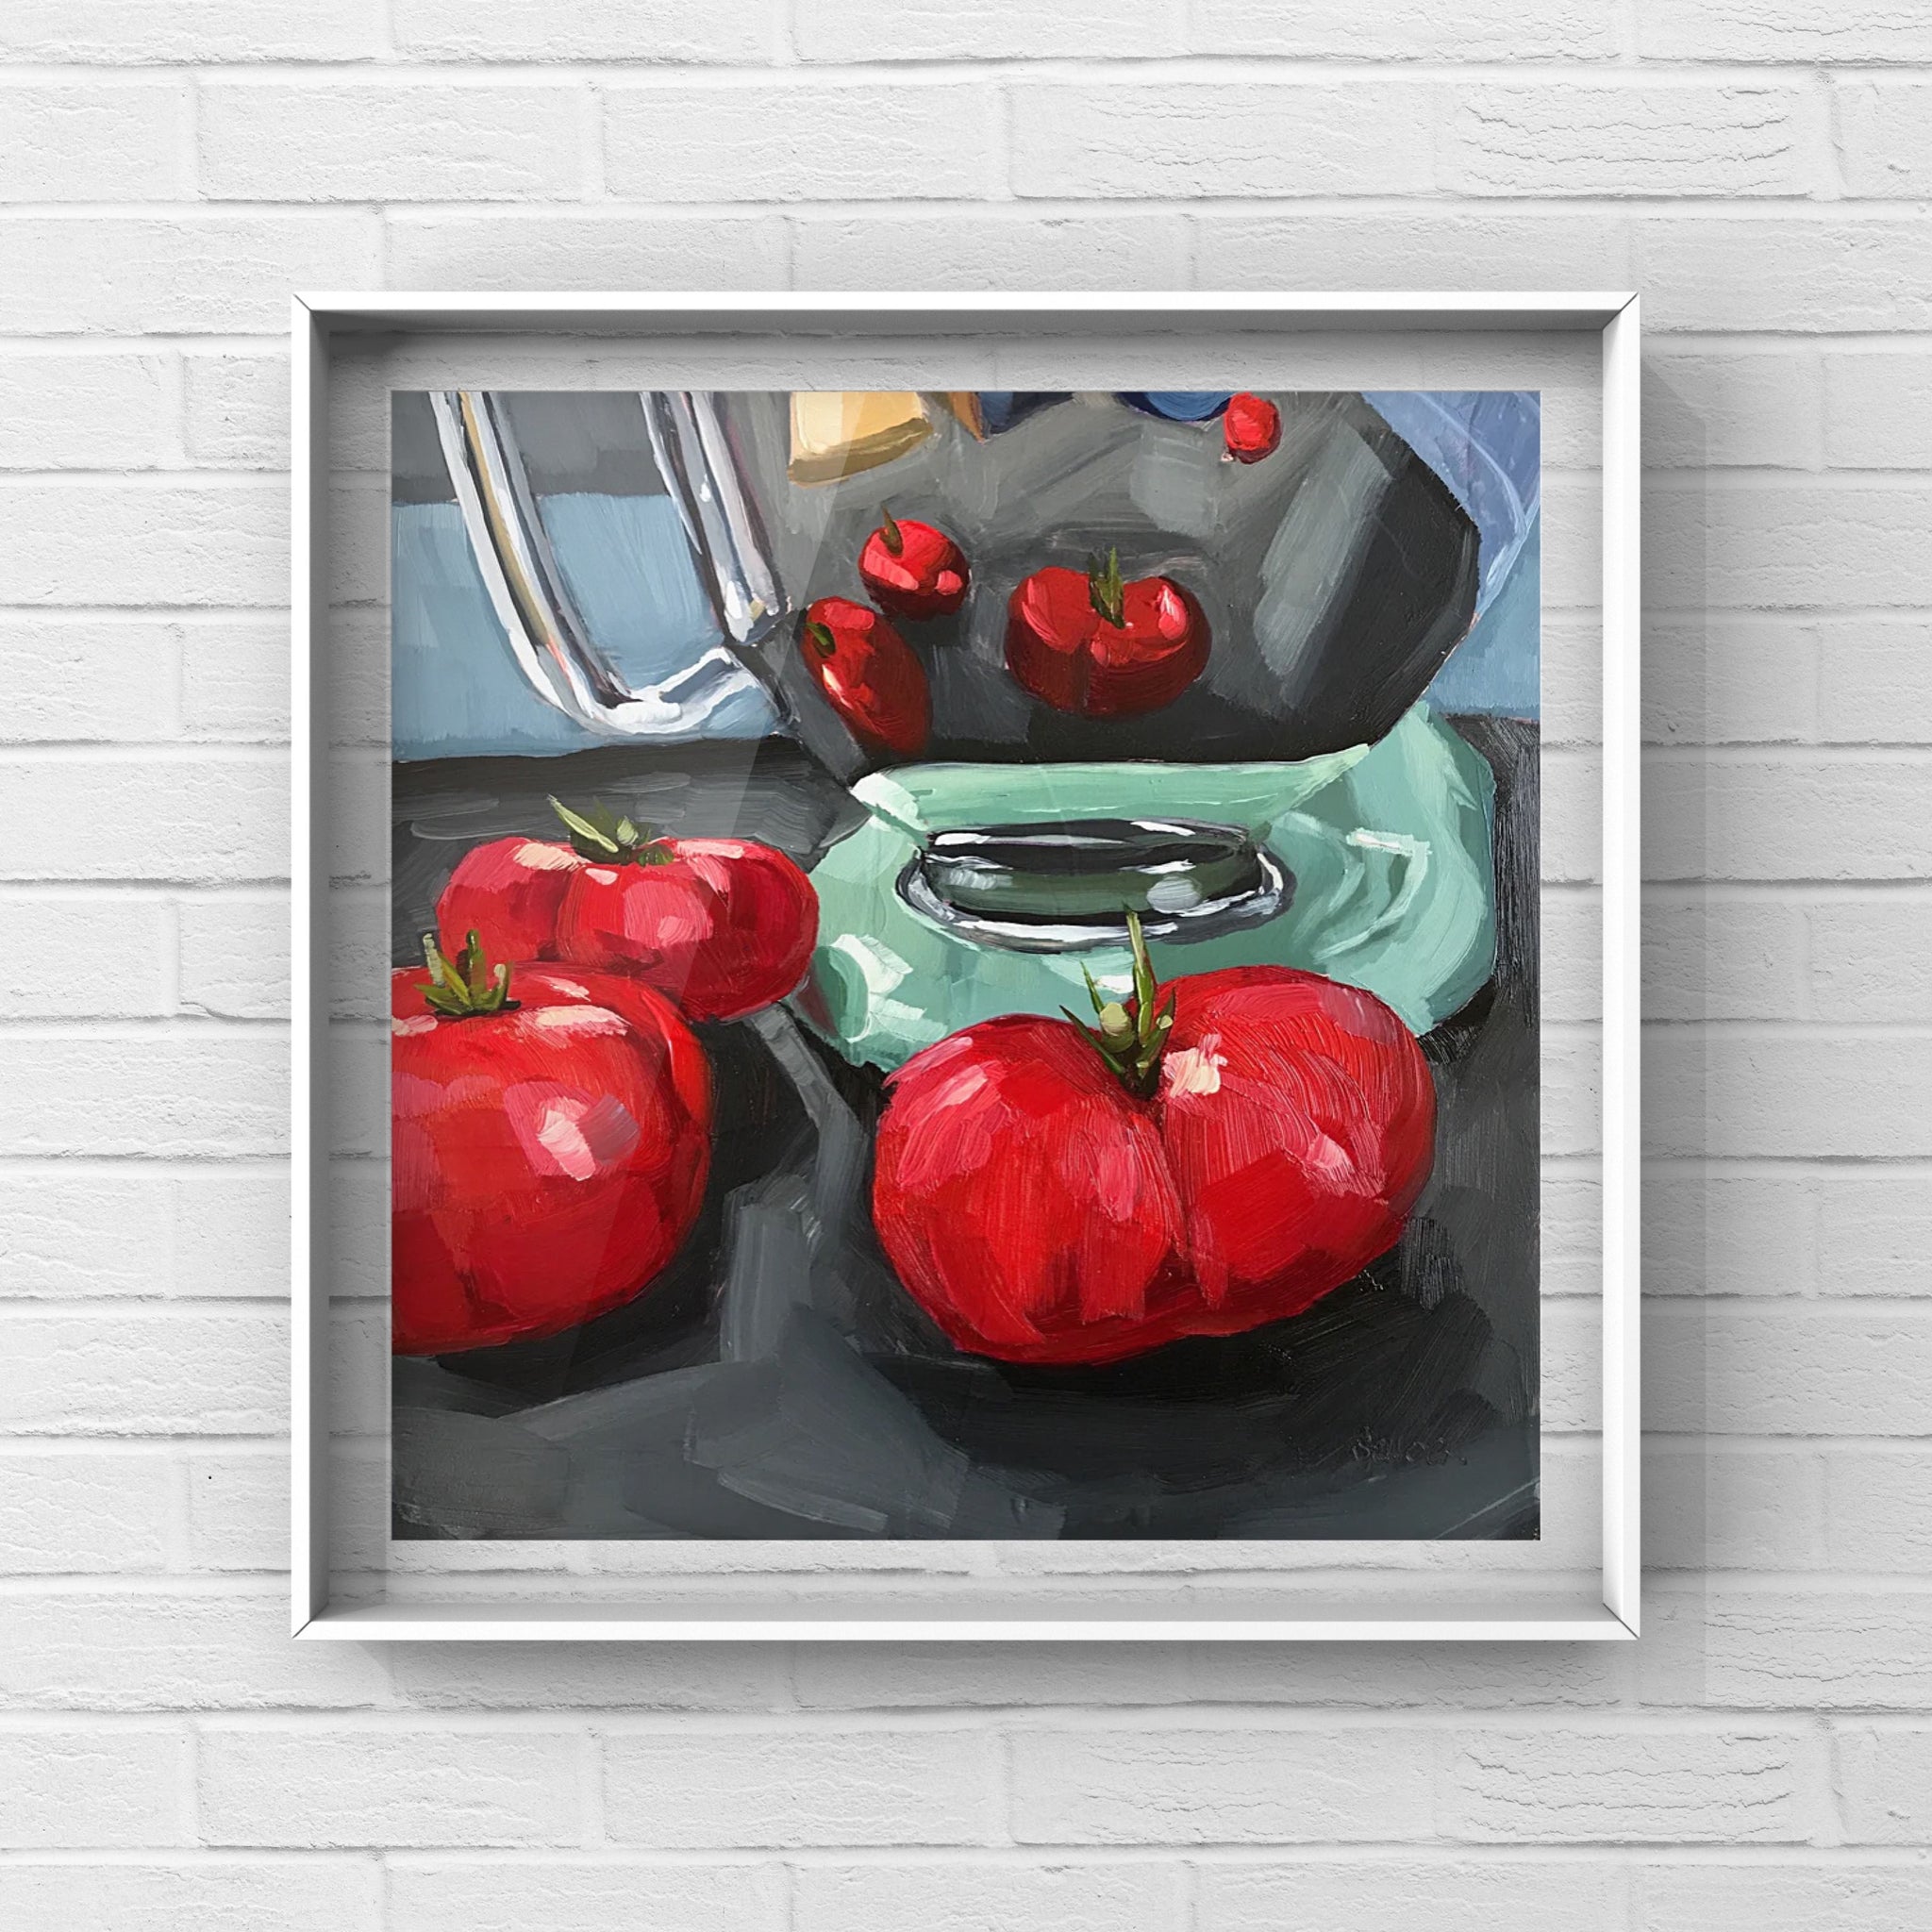 Mixer and Tomatoes - 6x6